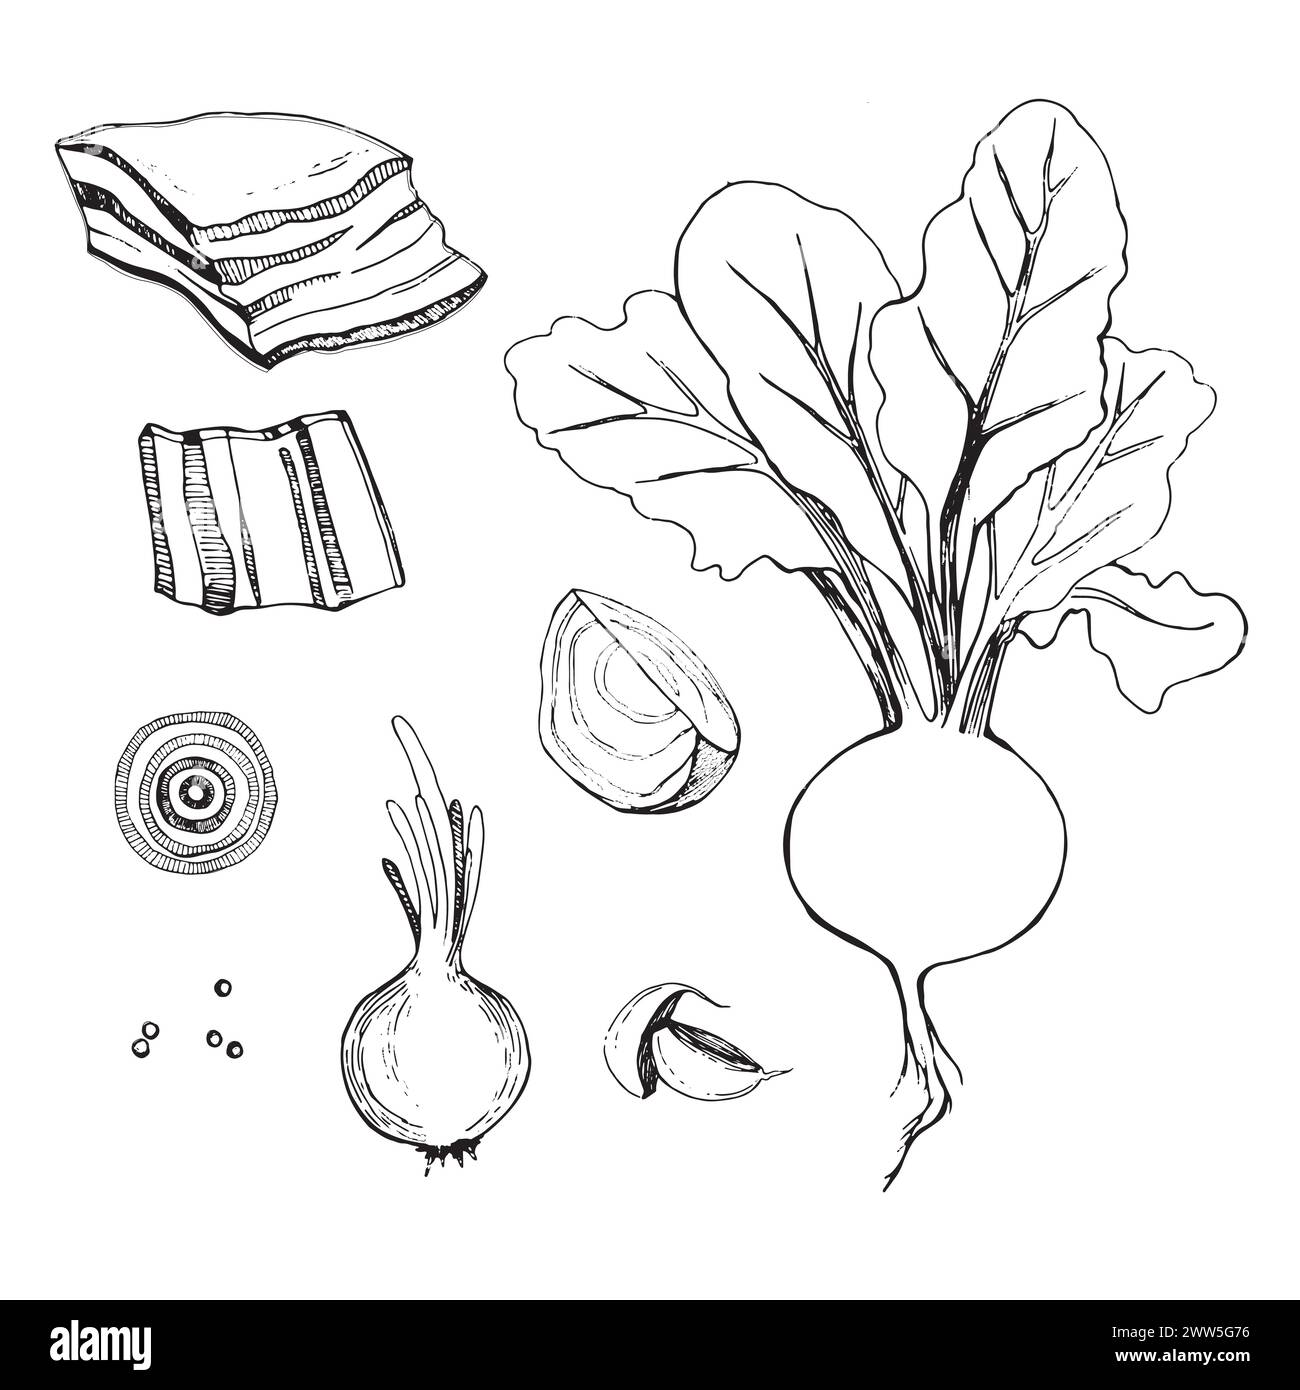 Set of vector illustrations. Beets with tops, a slice of beets, onions, lard, bacon, garlic, pepper drawn with a black outline in vector. Stock Vector